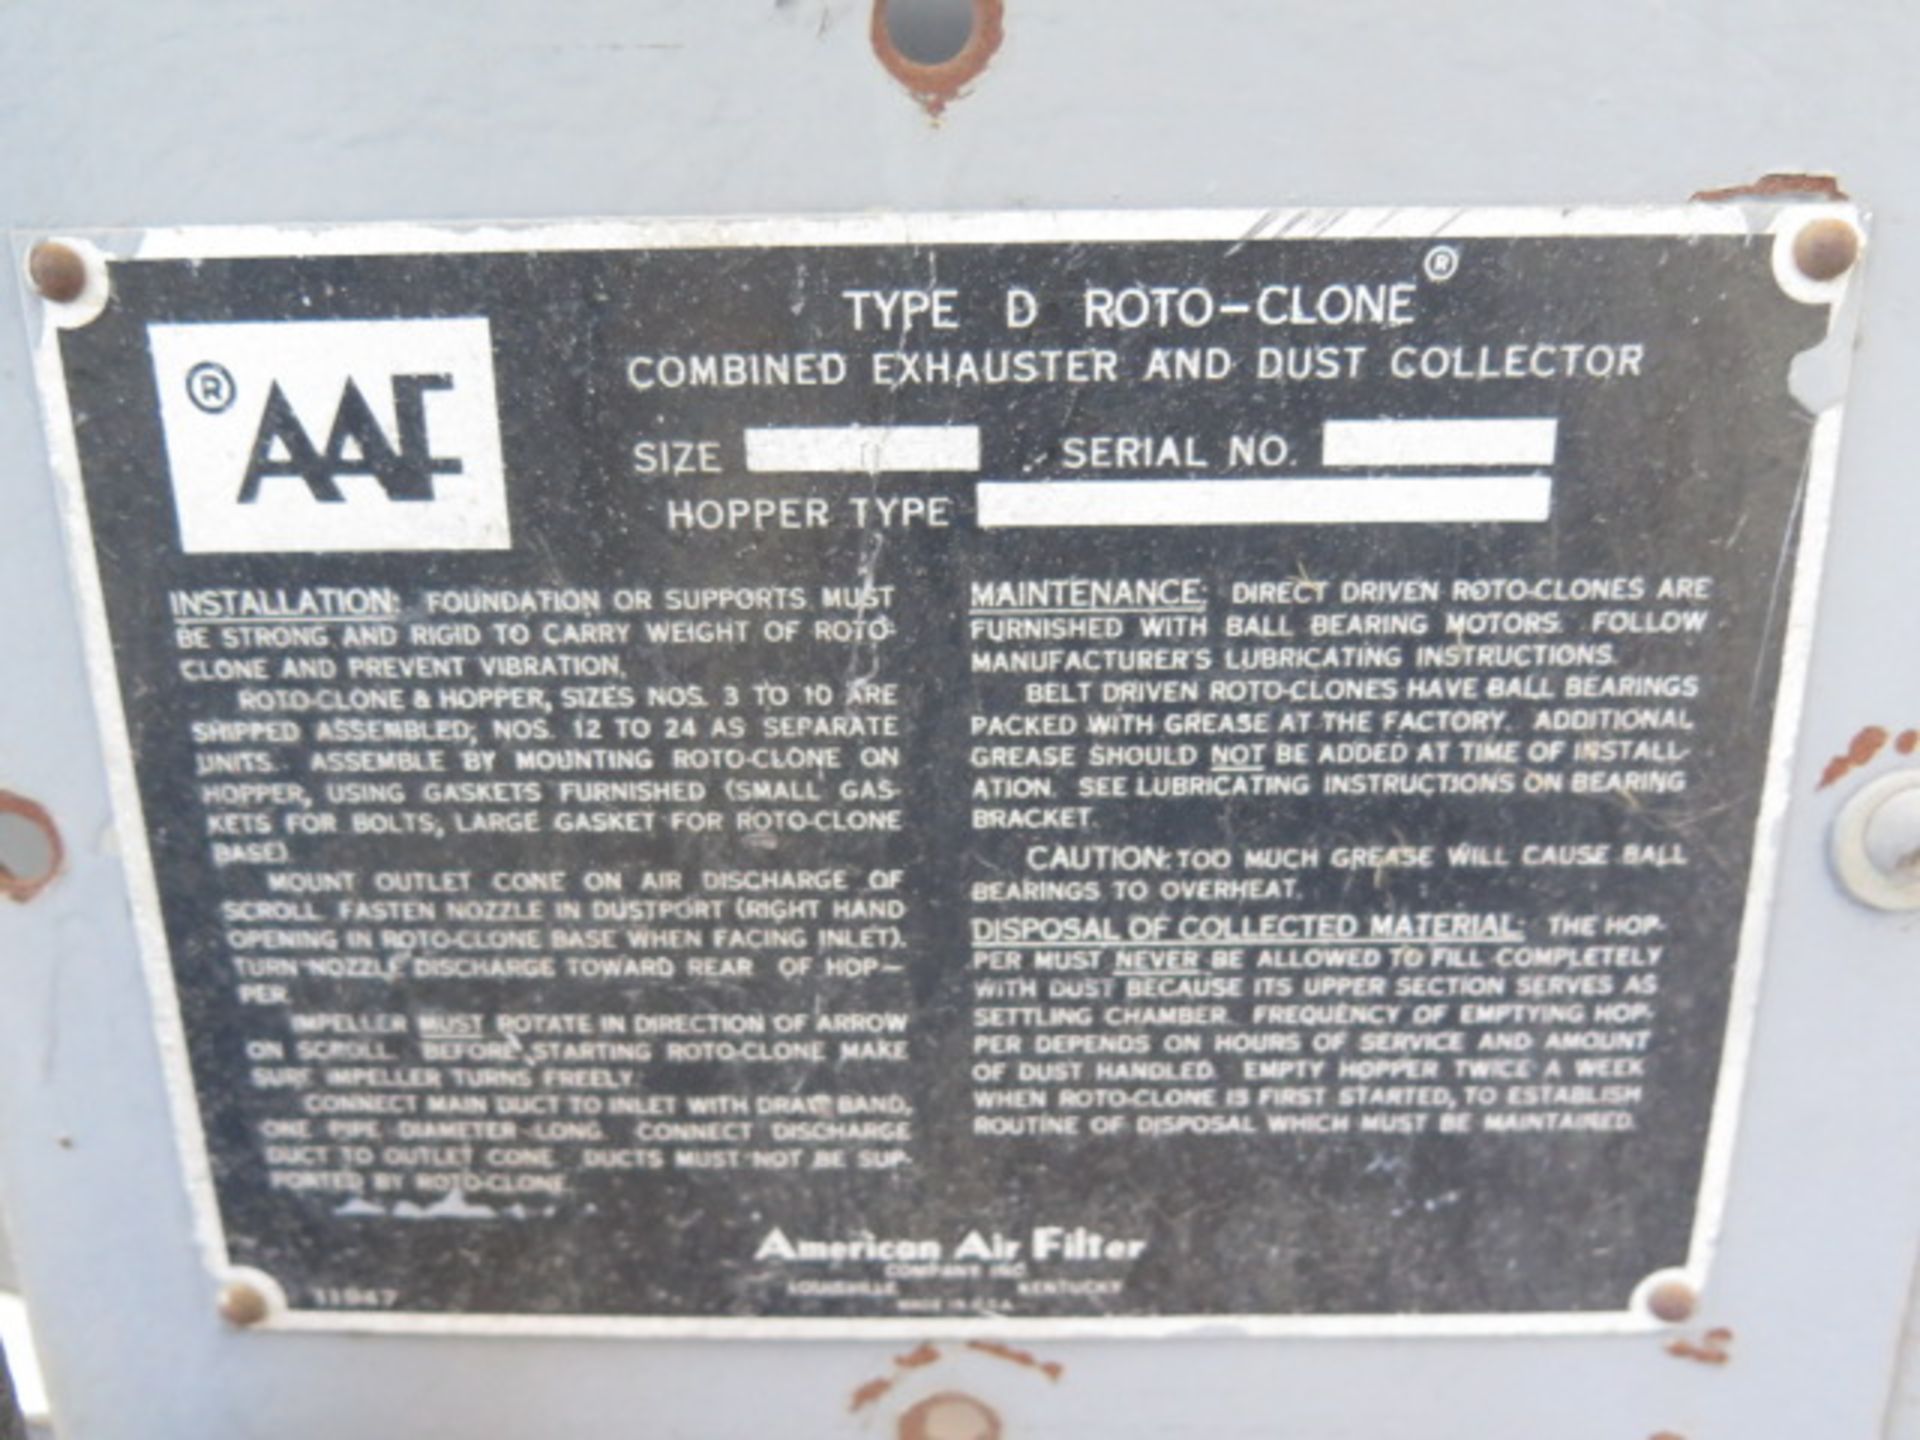 AAF Type D Roto-Clone Dust Collector (SOLD AS-IS - NO WARRANTY) - Image 7 of 9